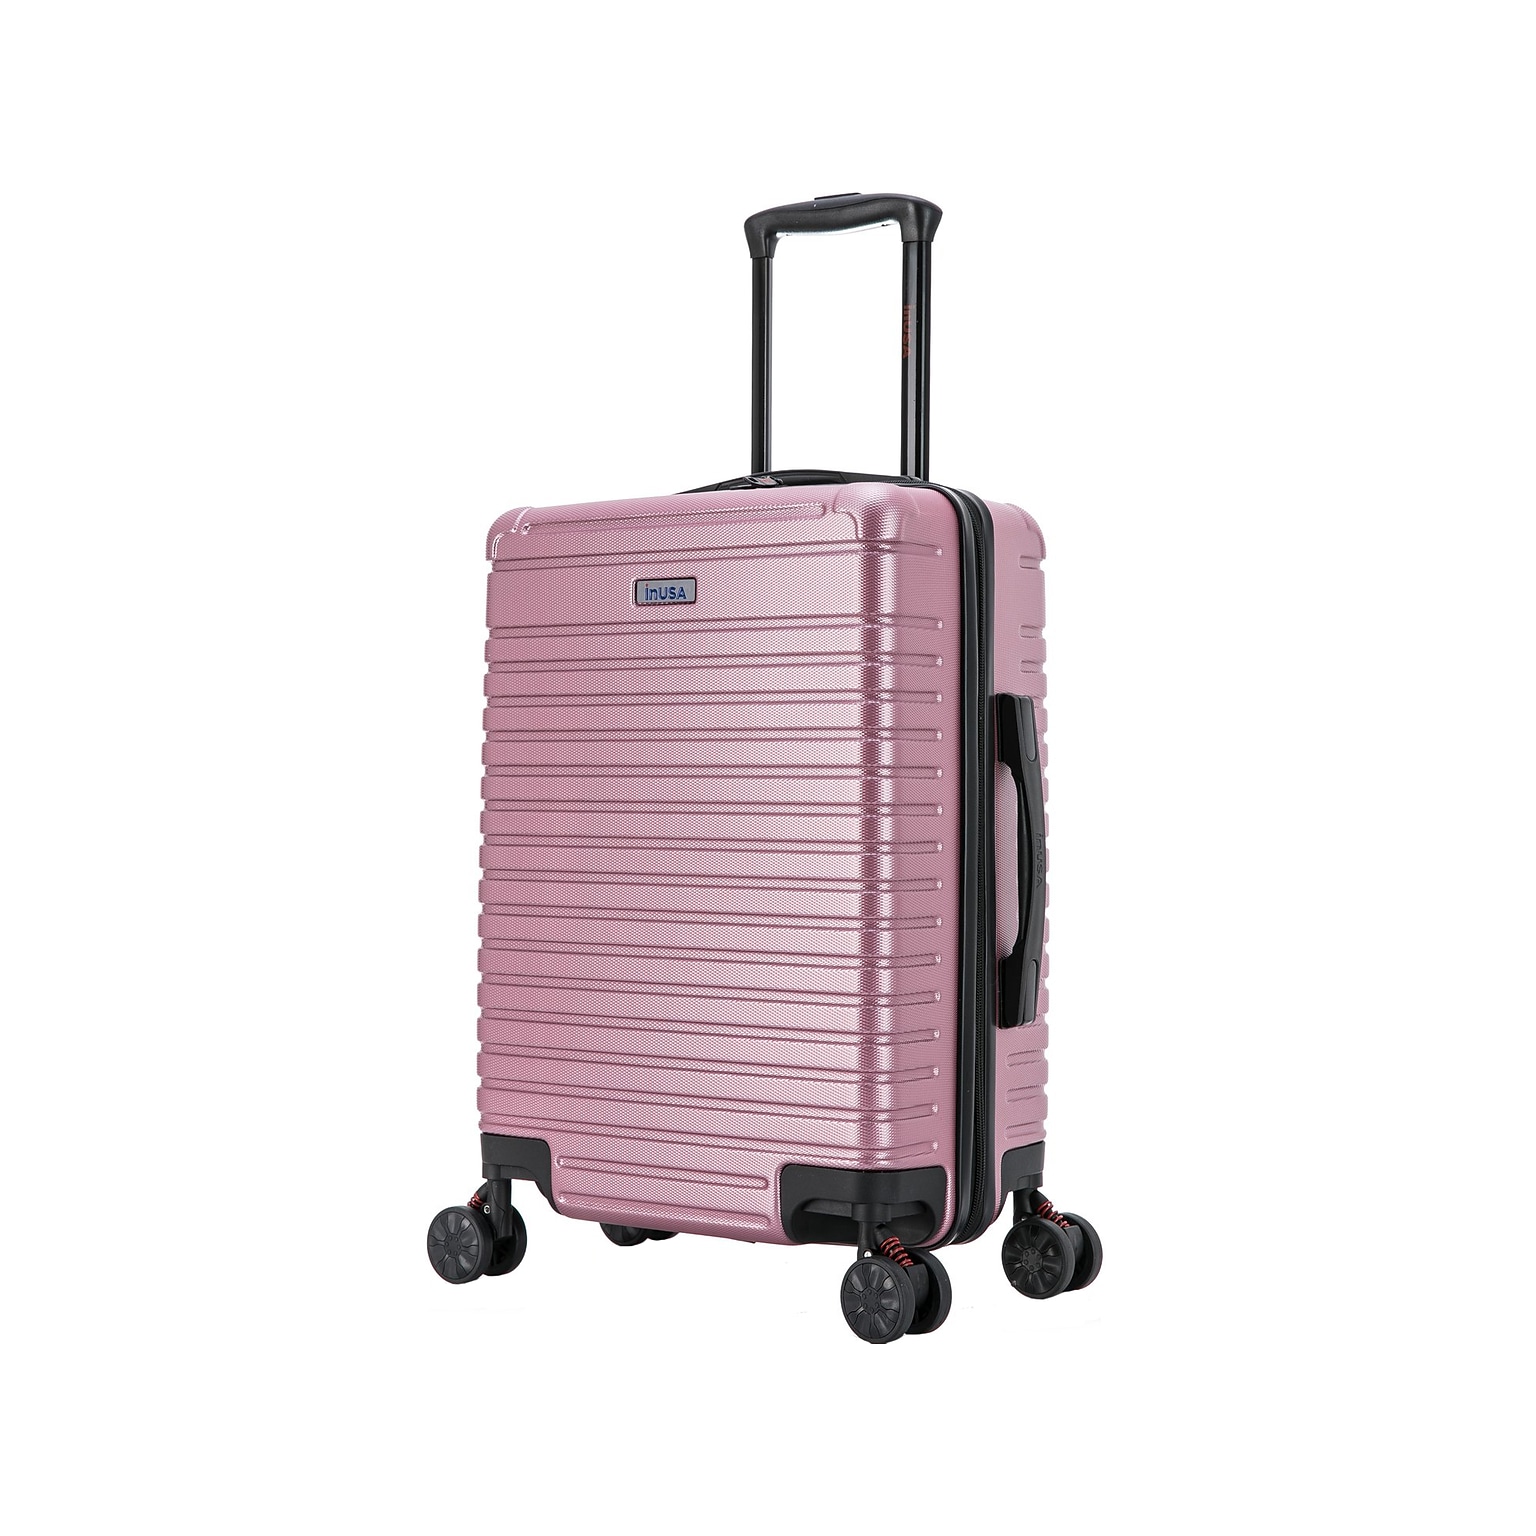 InUSA Deep Plastic Carry-On Luggage, Rose Gold (IUDEE00S-ROS)